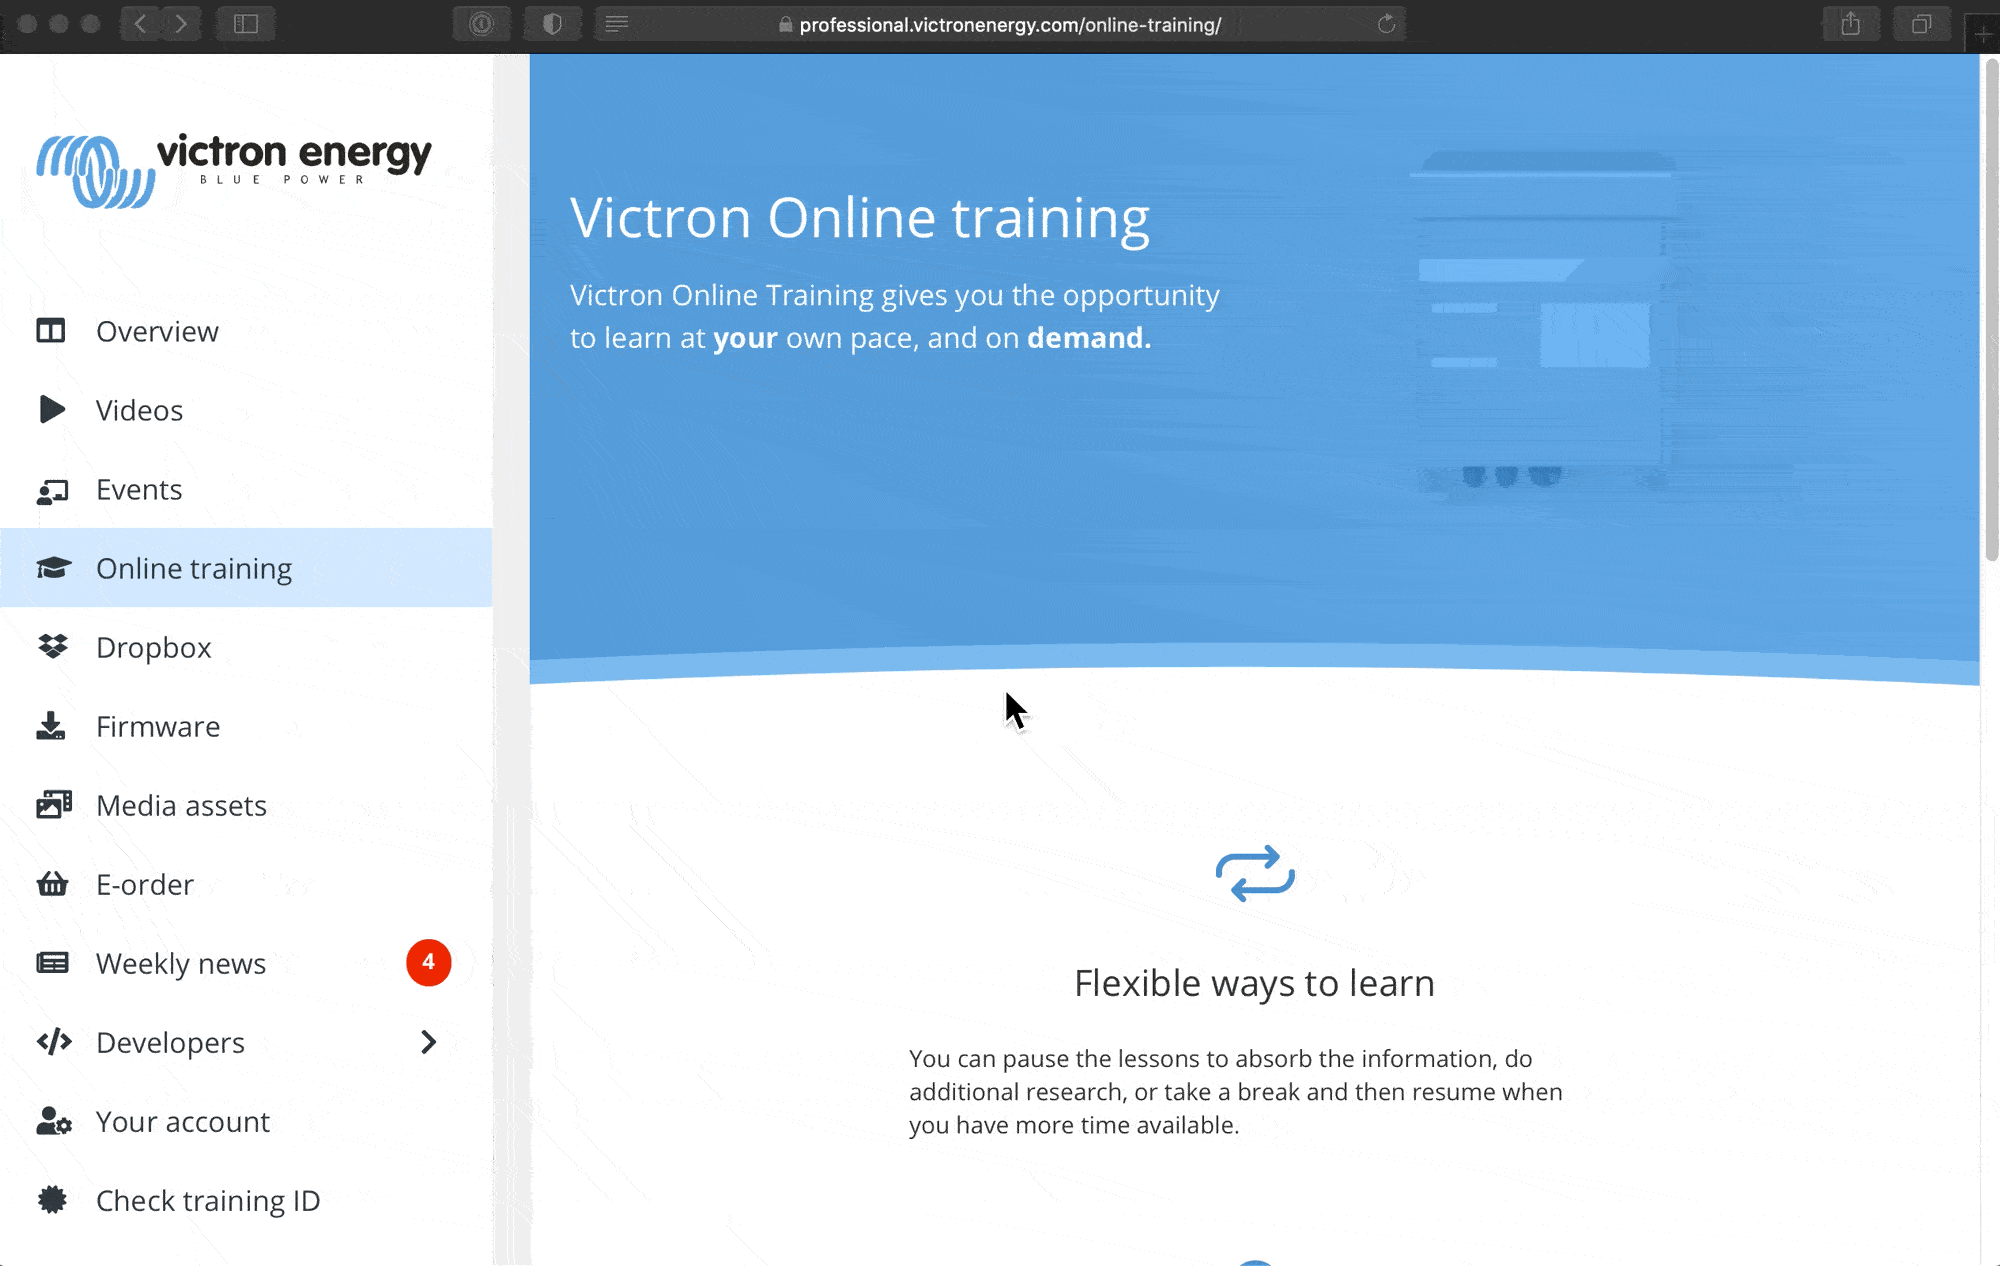 I've lost my Victron Online Training Certificates, how do I